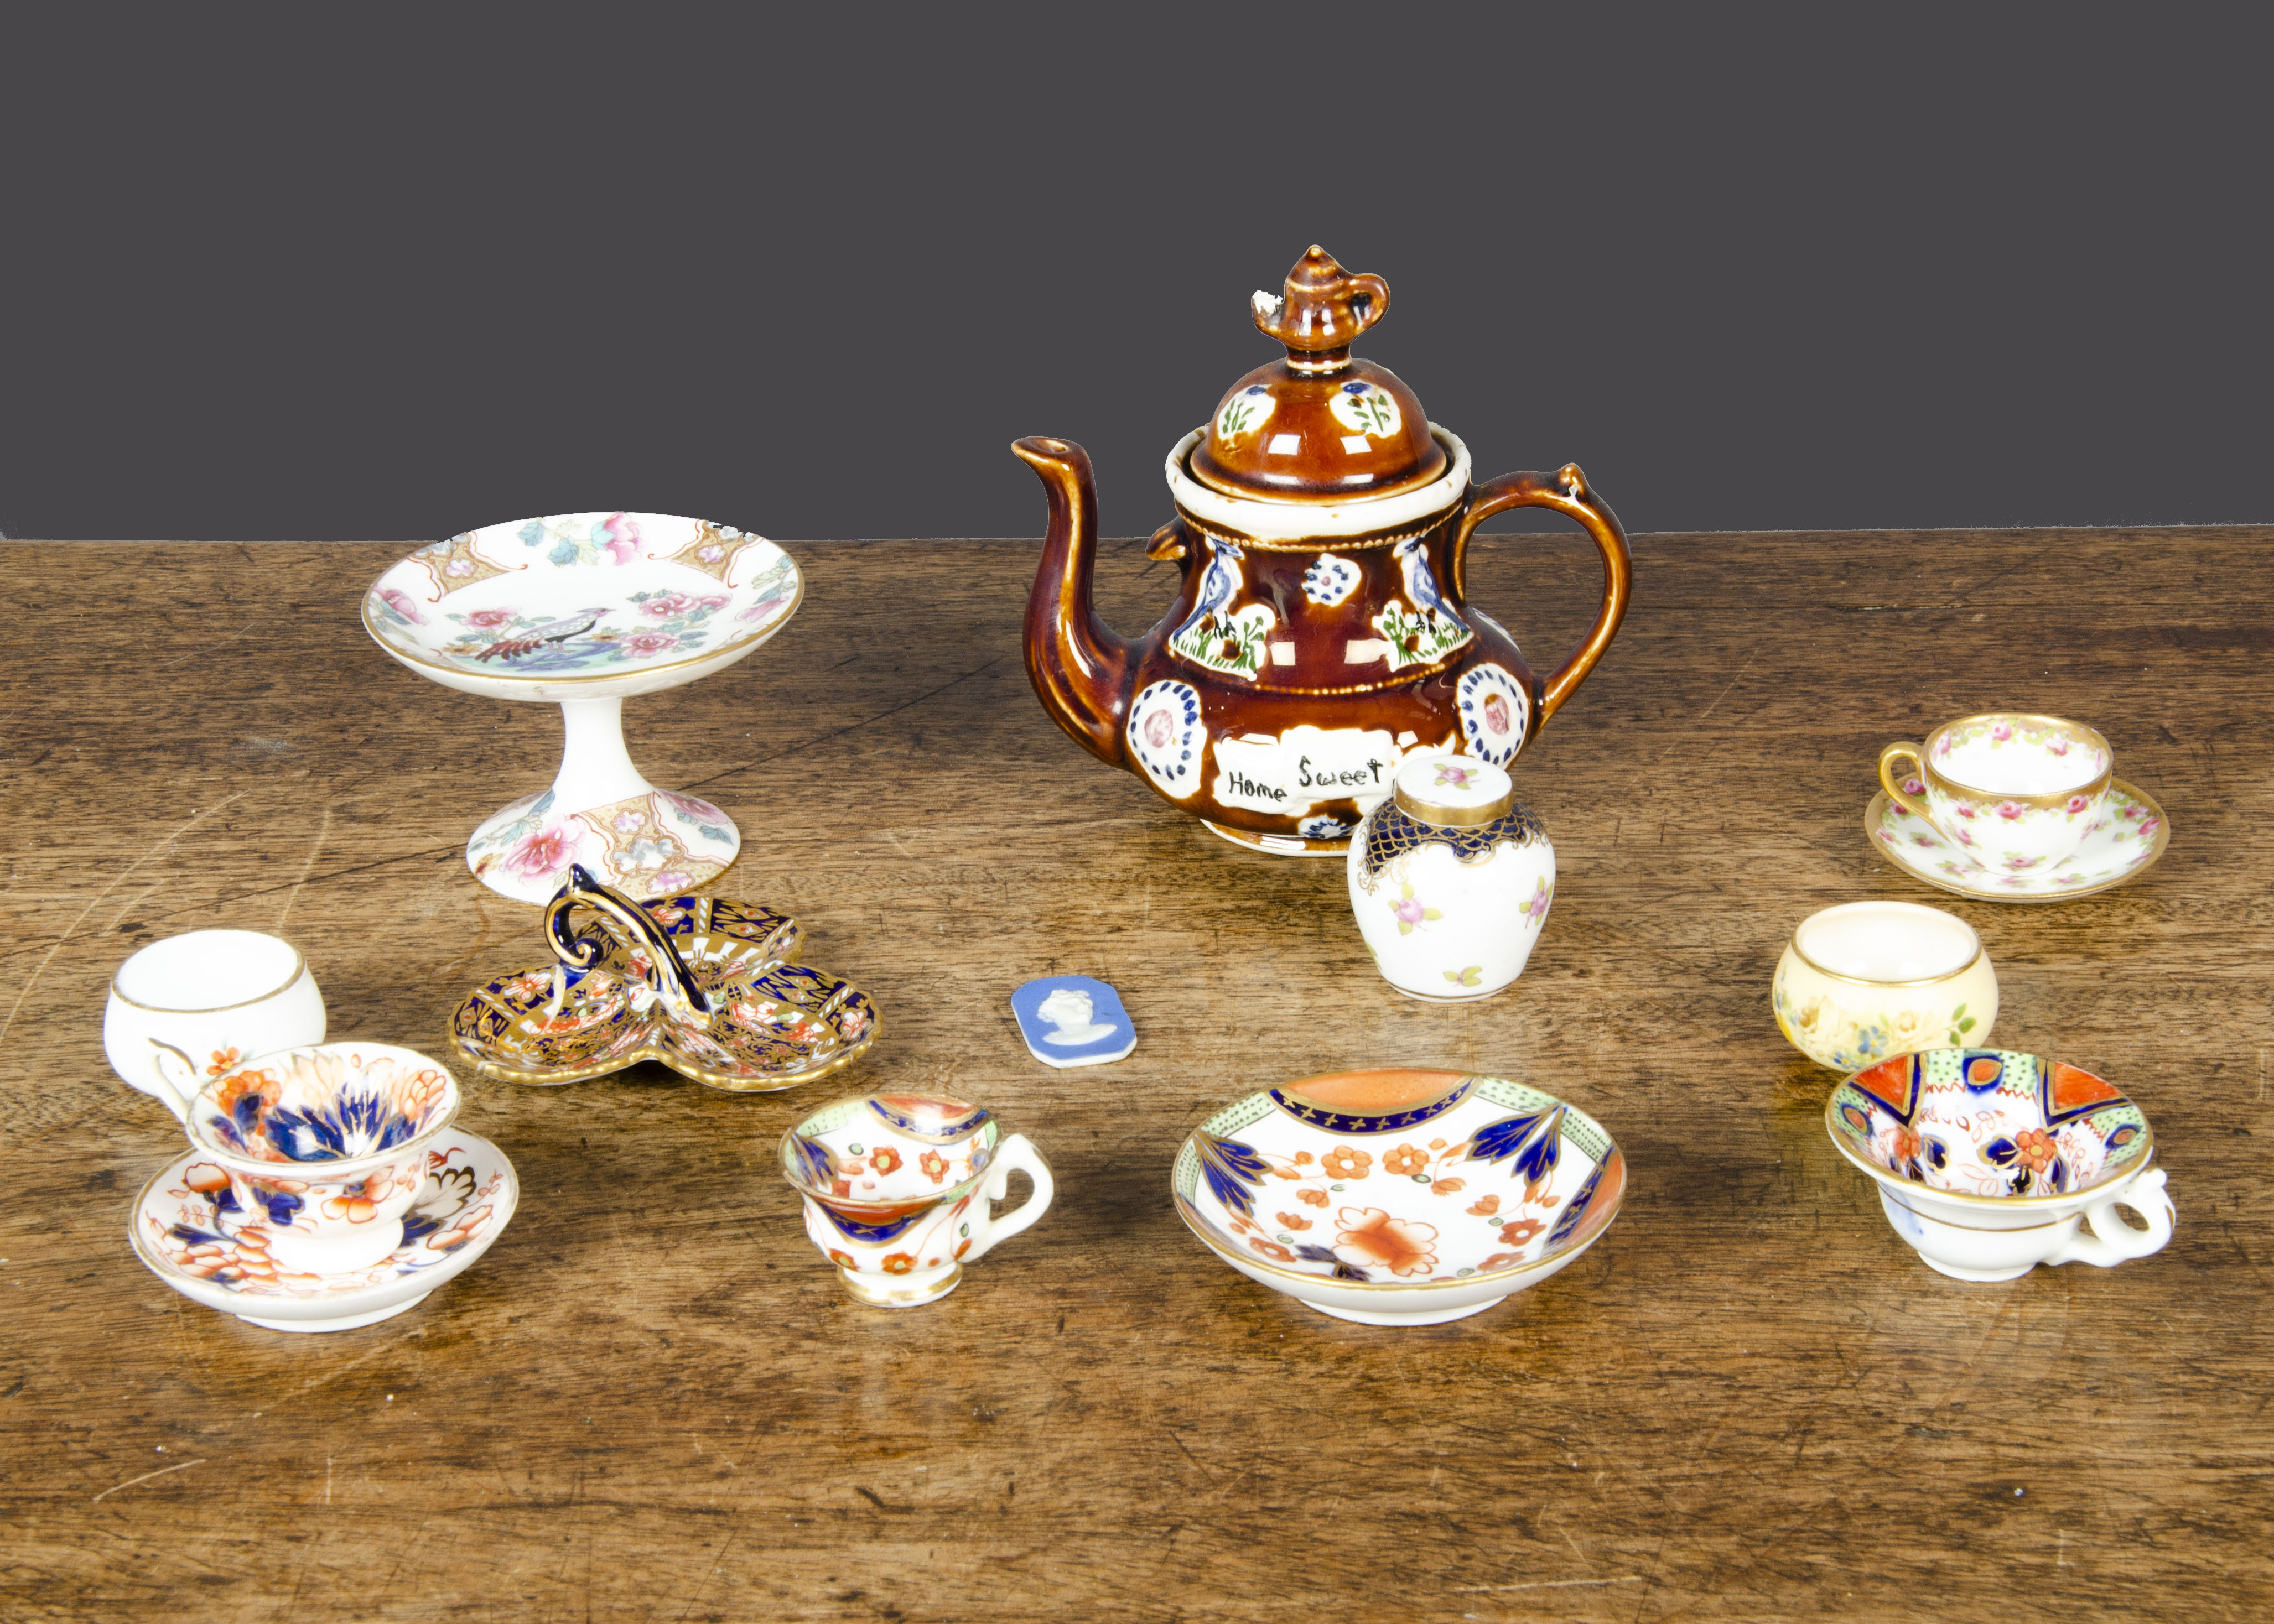 Miniature porcelain, a 19th Century Imari pattern coffee cup, tea cup and saucer; another Imari